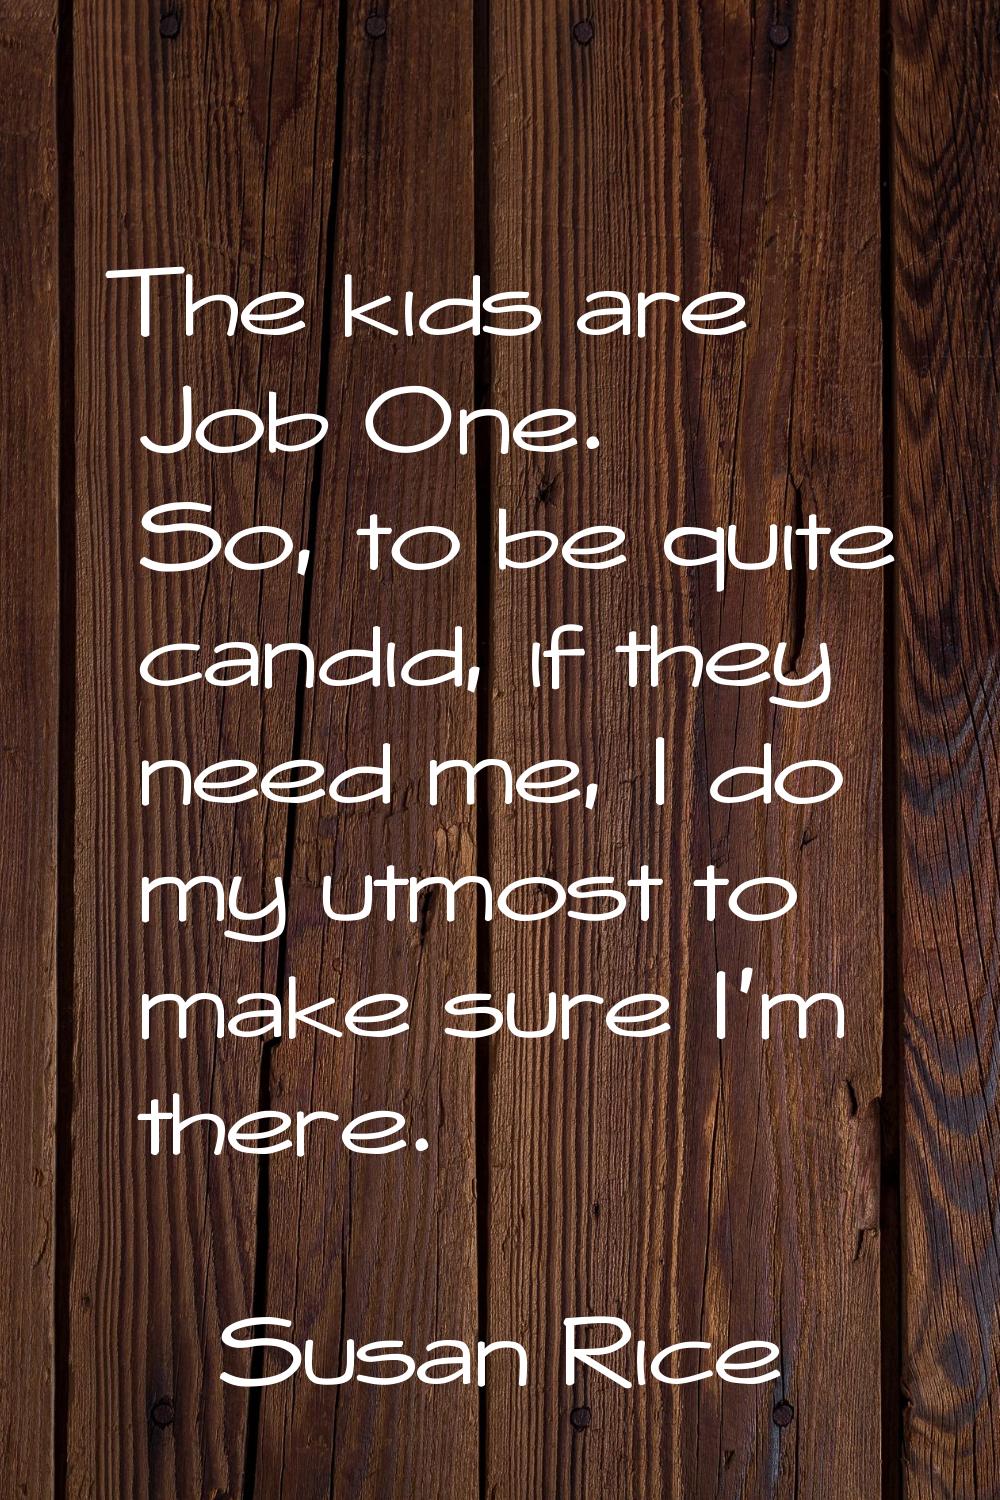 The kids are Job One. So, to be quite candid, if they need me, I do my utmost to make sure I'm ther